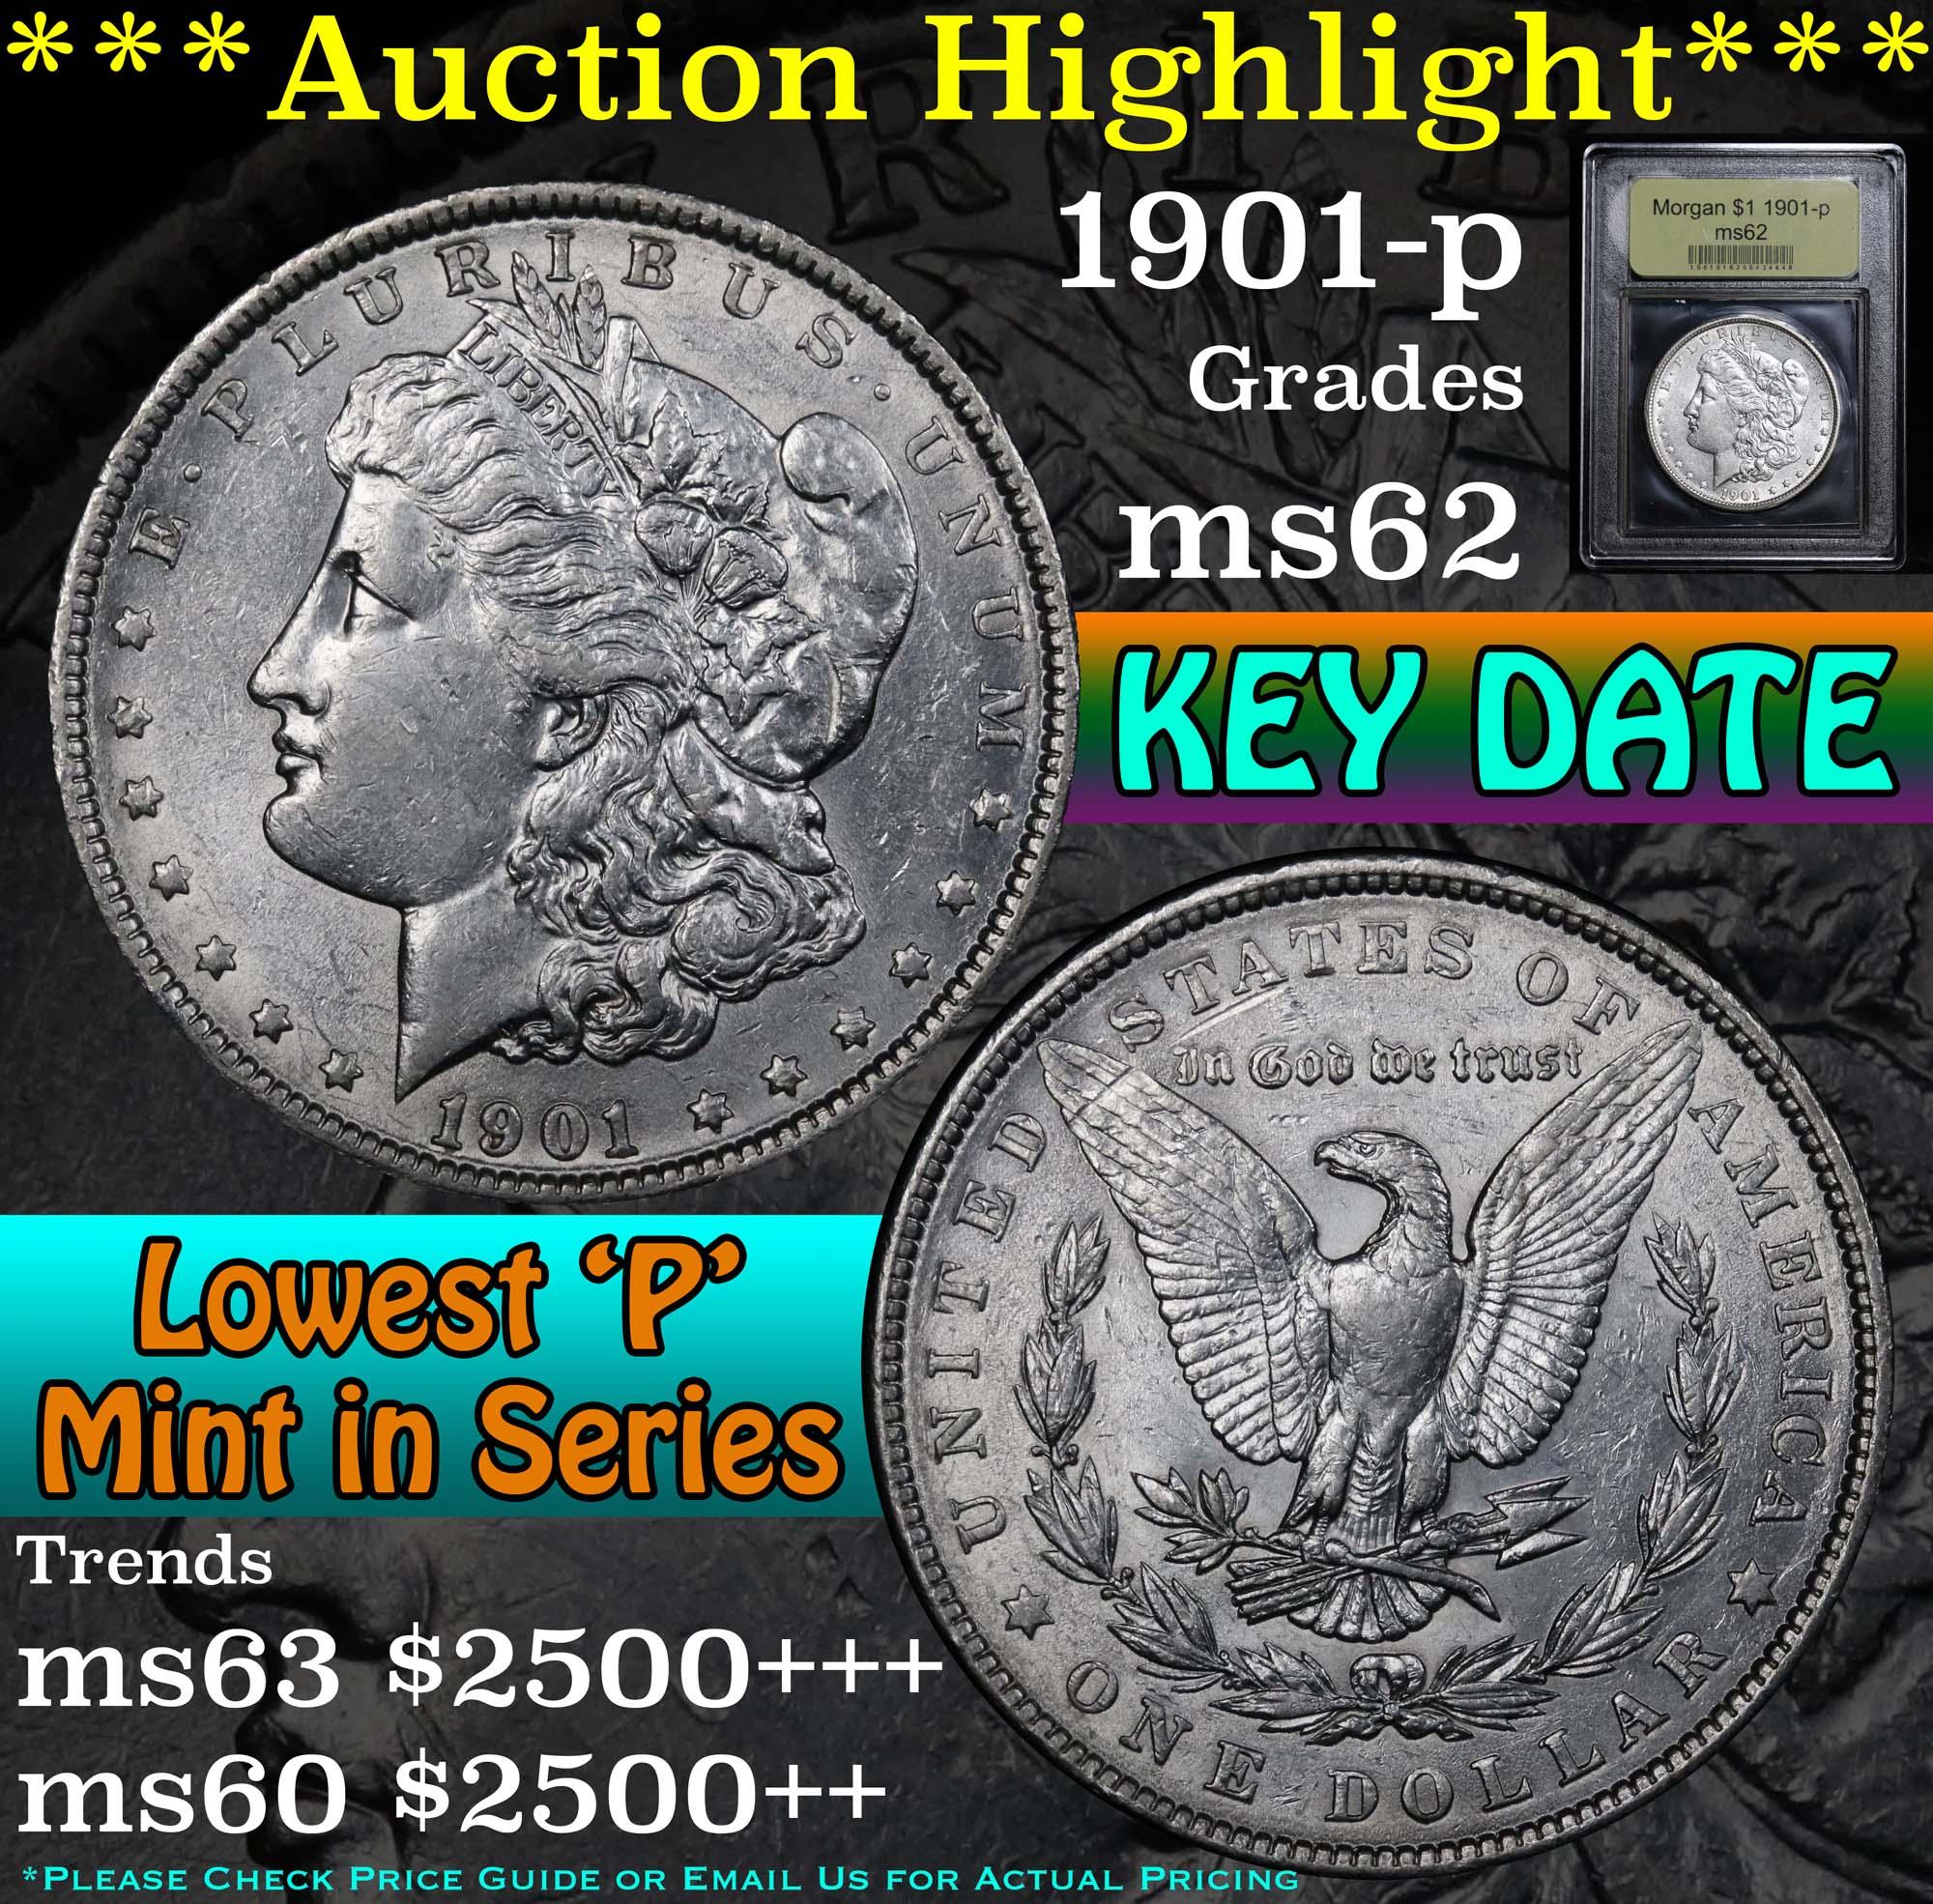 **Auction Highlight** 1901-p Morgan Dollar $1 Graded Select Unc by USCG (fc)